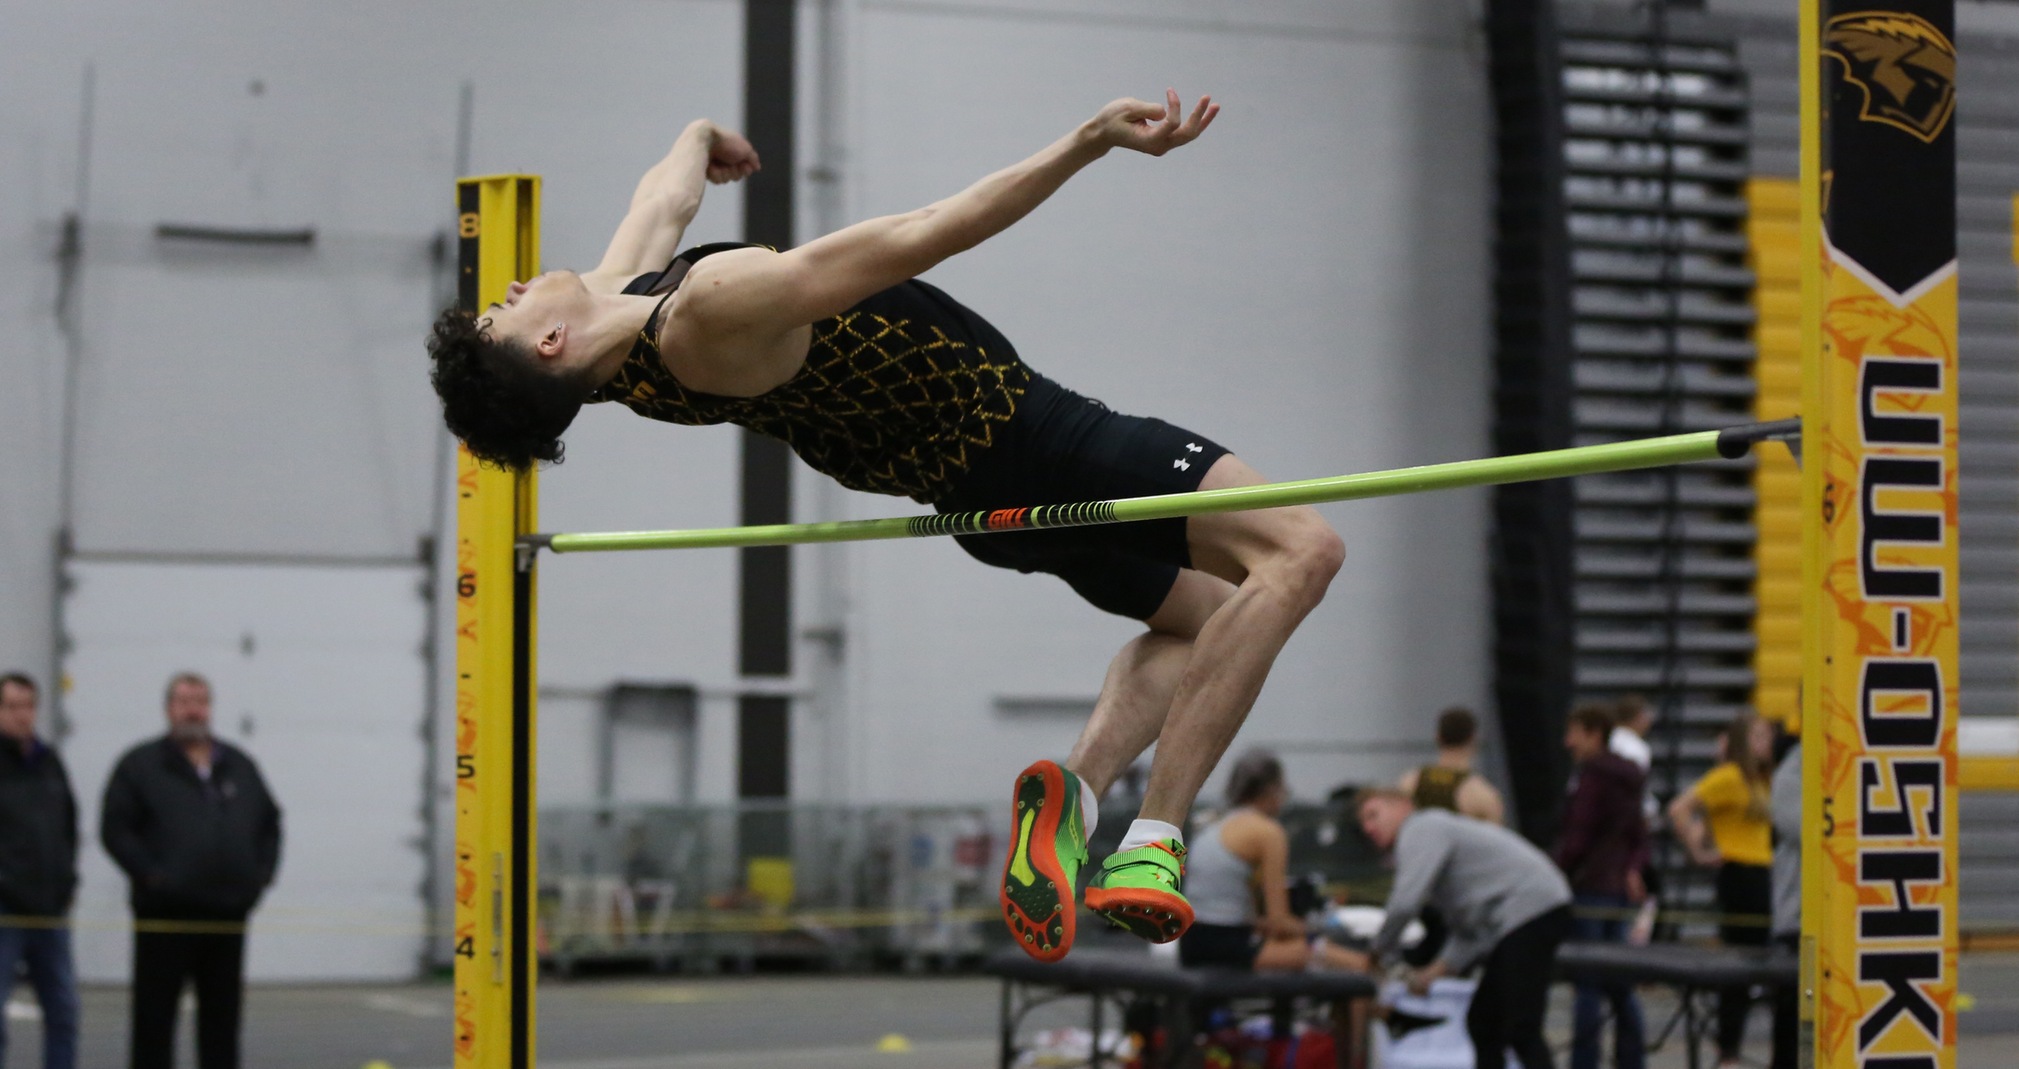 Justin Rivers won the high jump with a leap of 6-8 3/4 during the Titans' victory over Lawrence University.